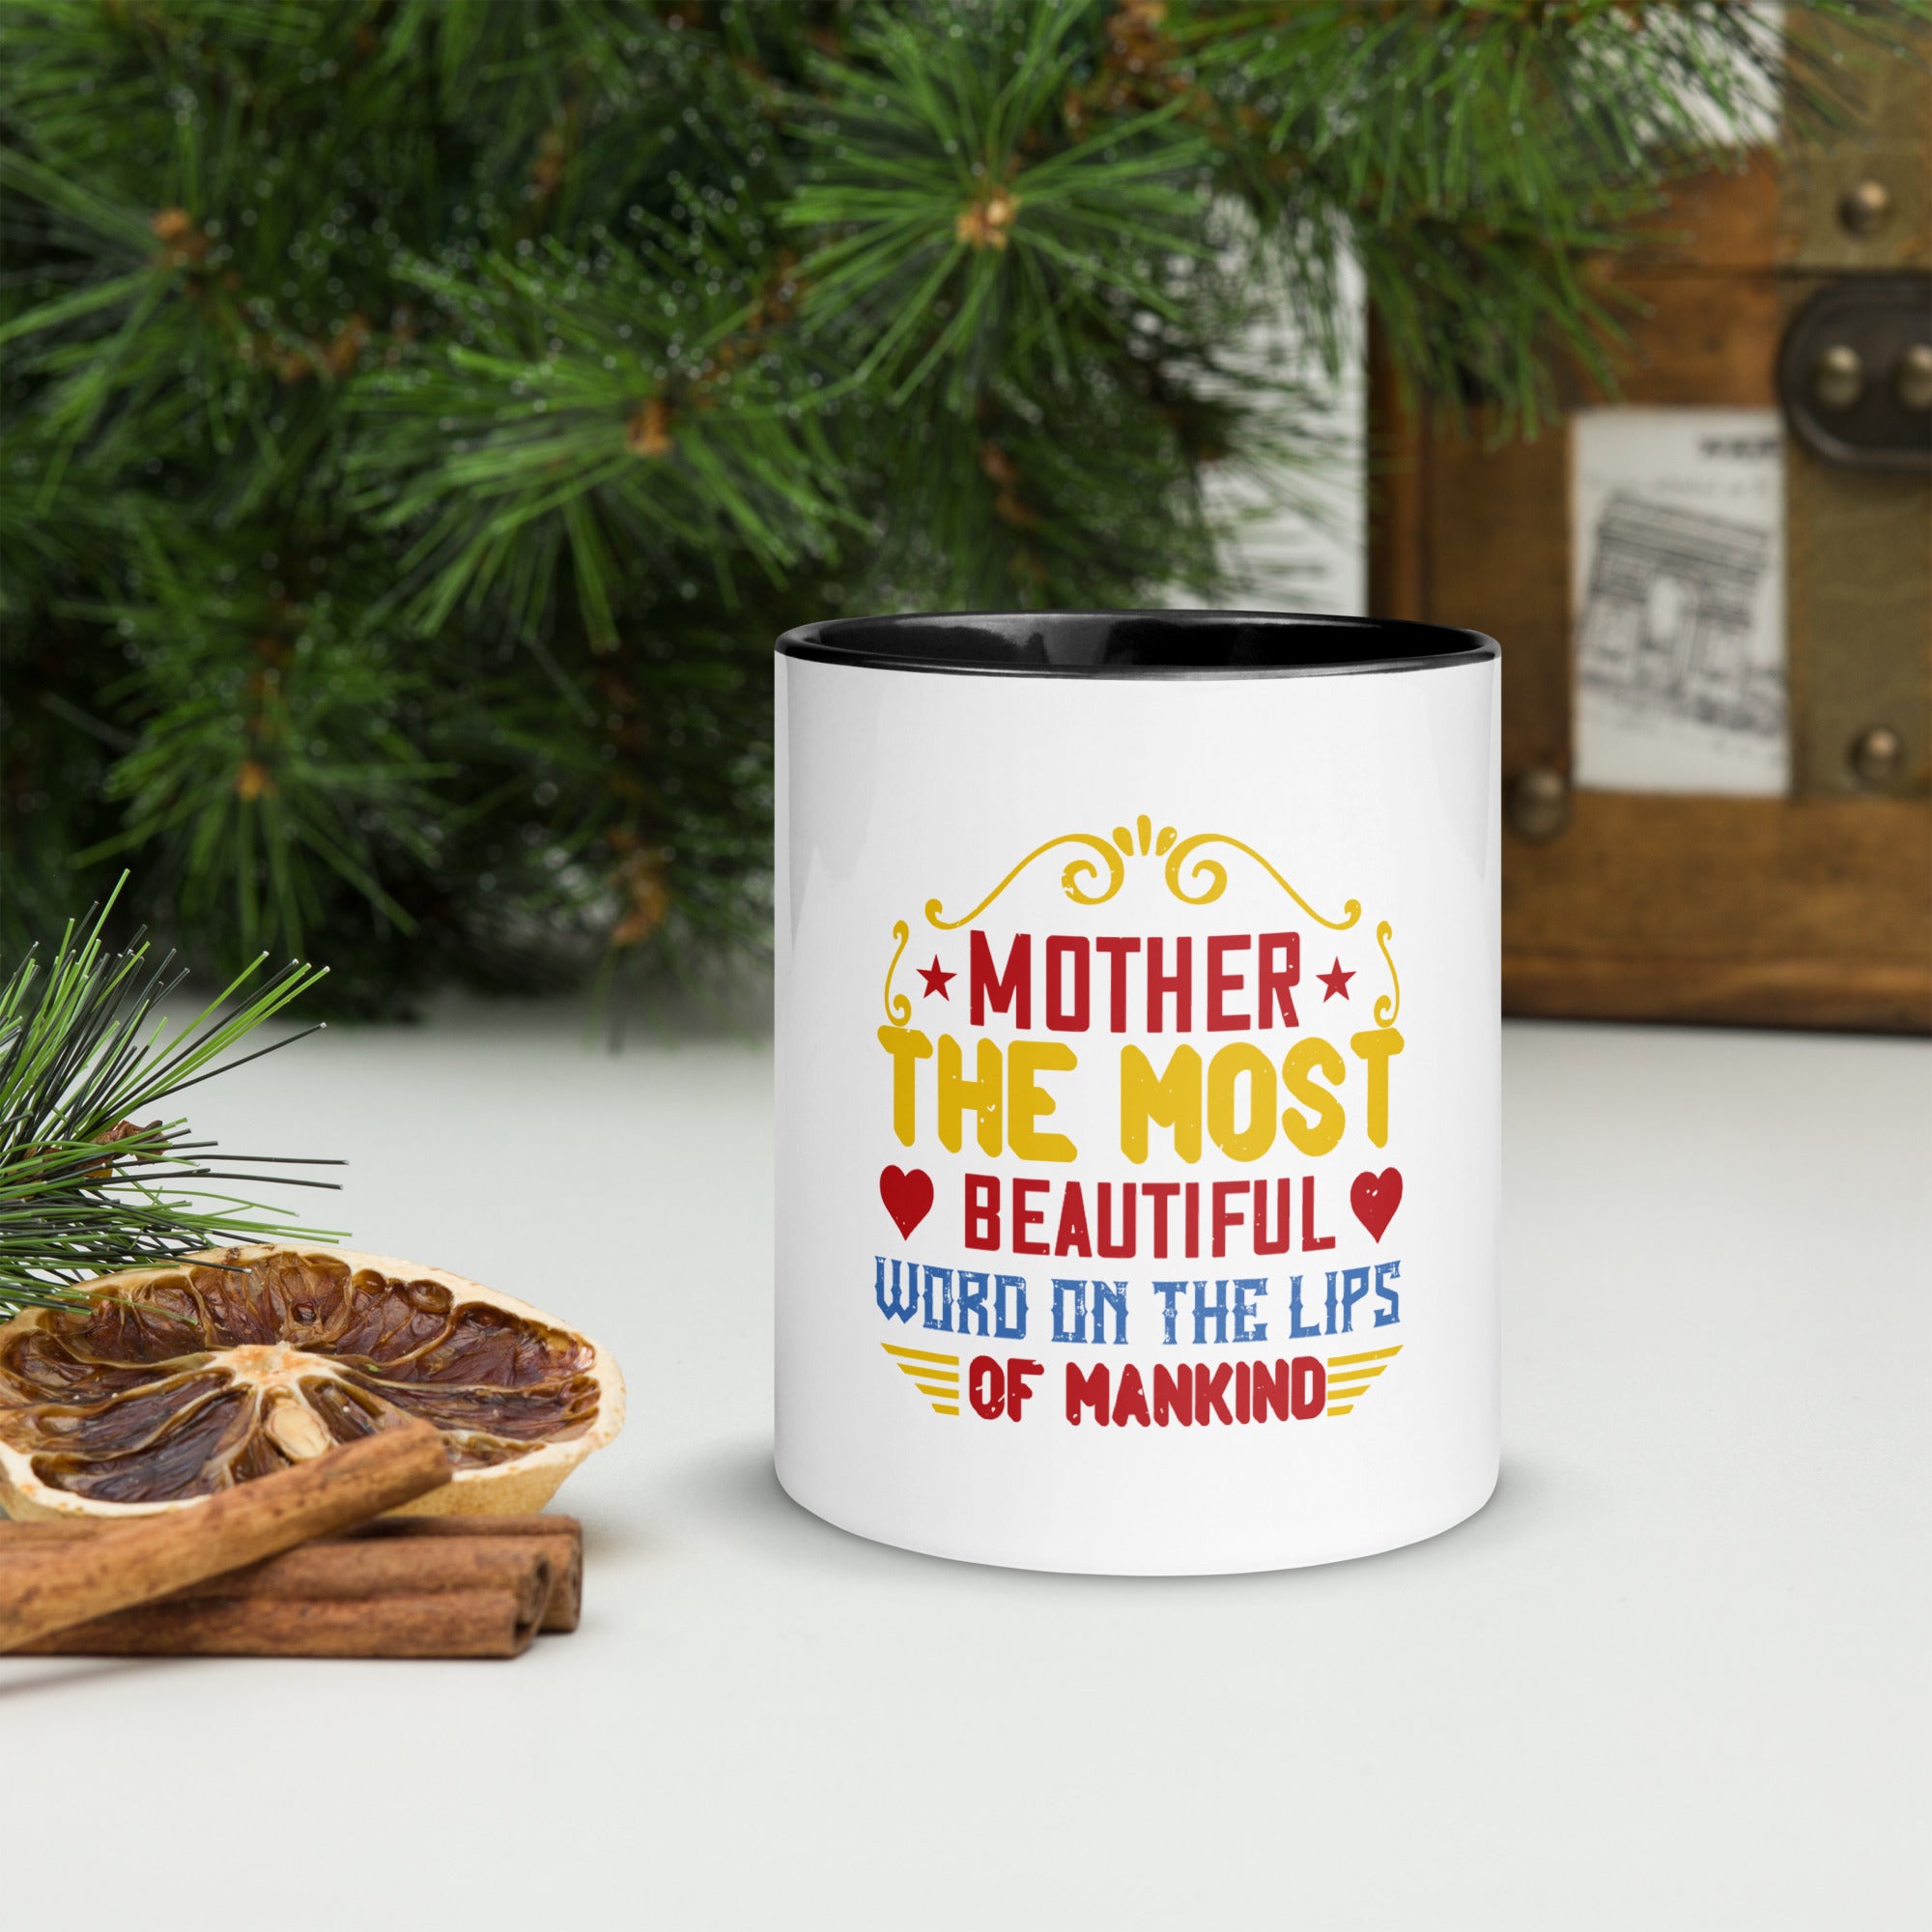 Mother the most beautiful word on the lips of mankind mug